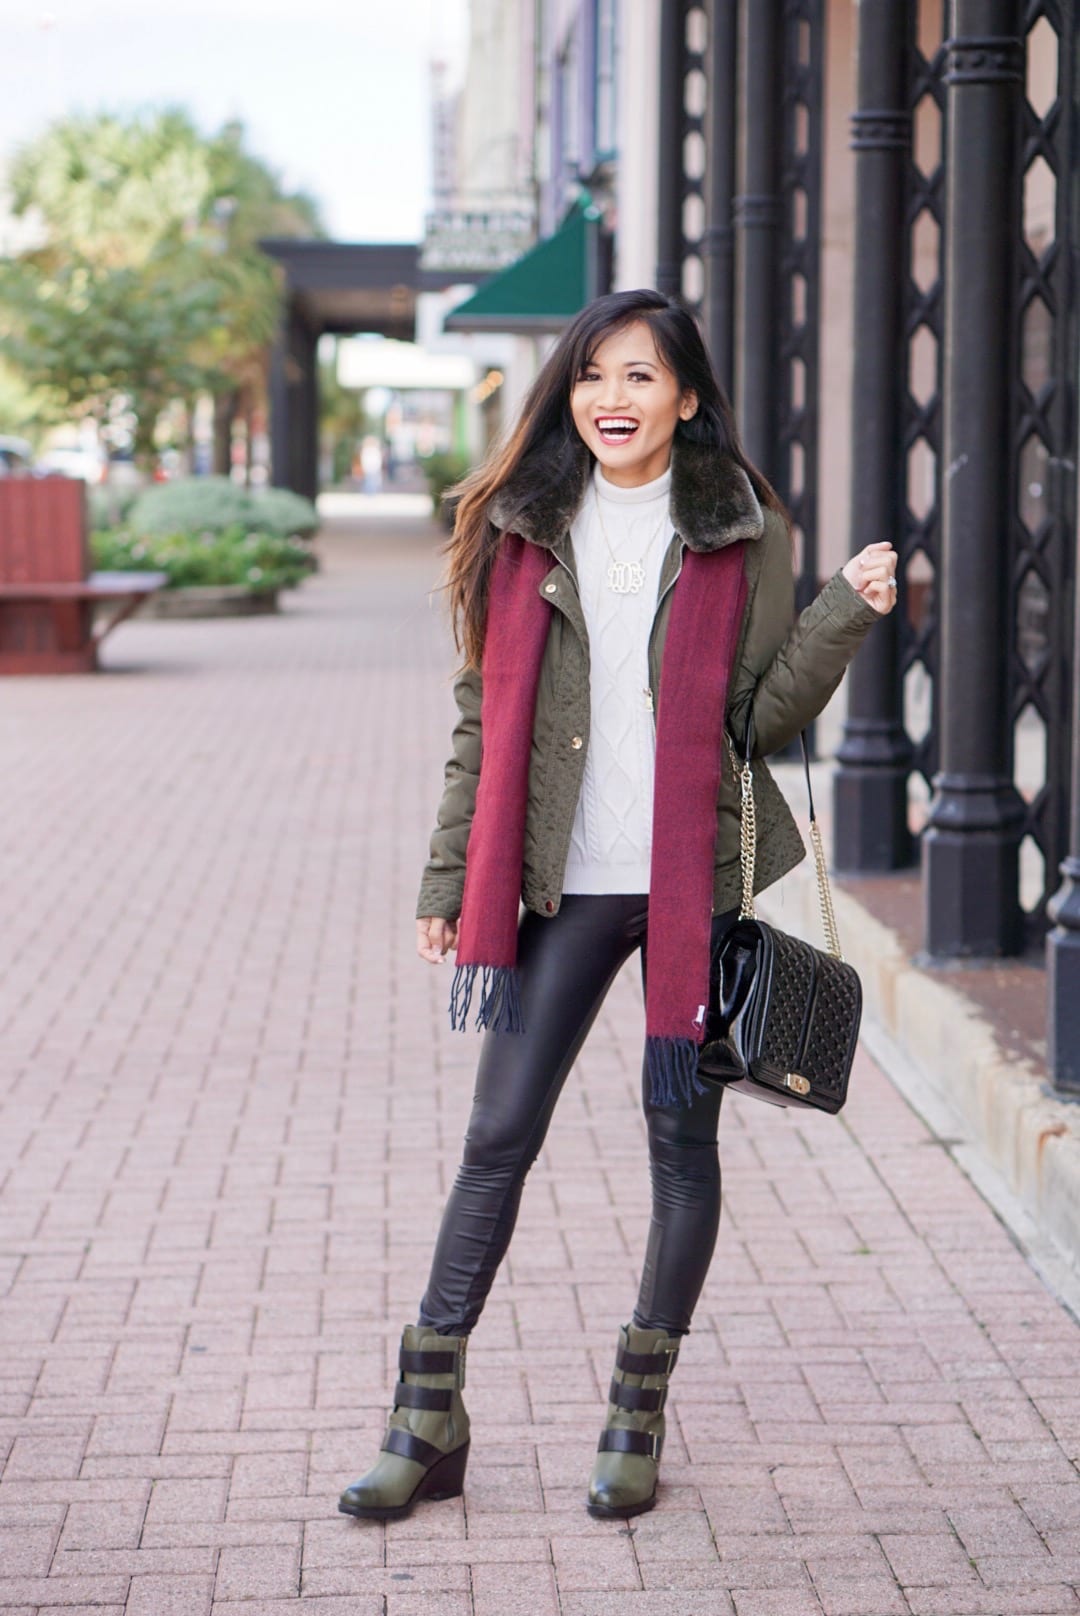 Sorel boots, holiday packing list, vacation packing list, winter packing list, faux leather pants, green puffer jacket 